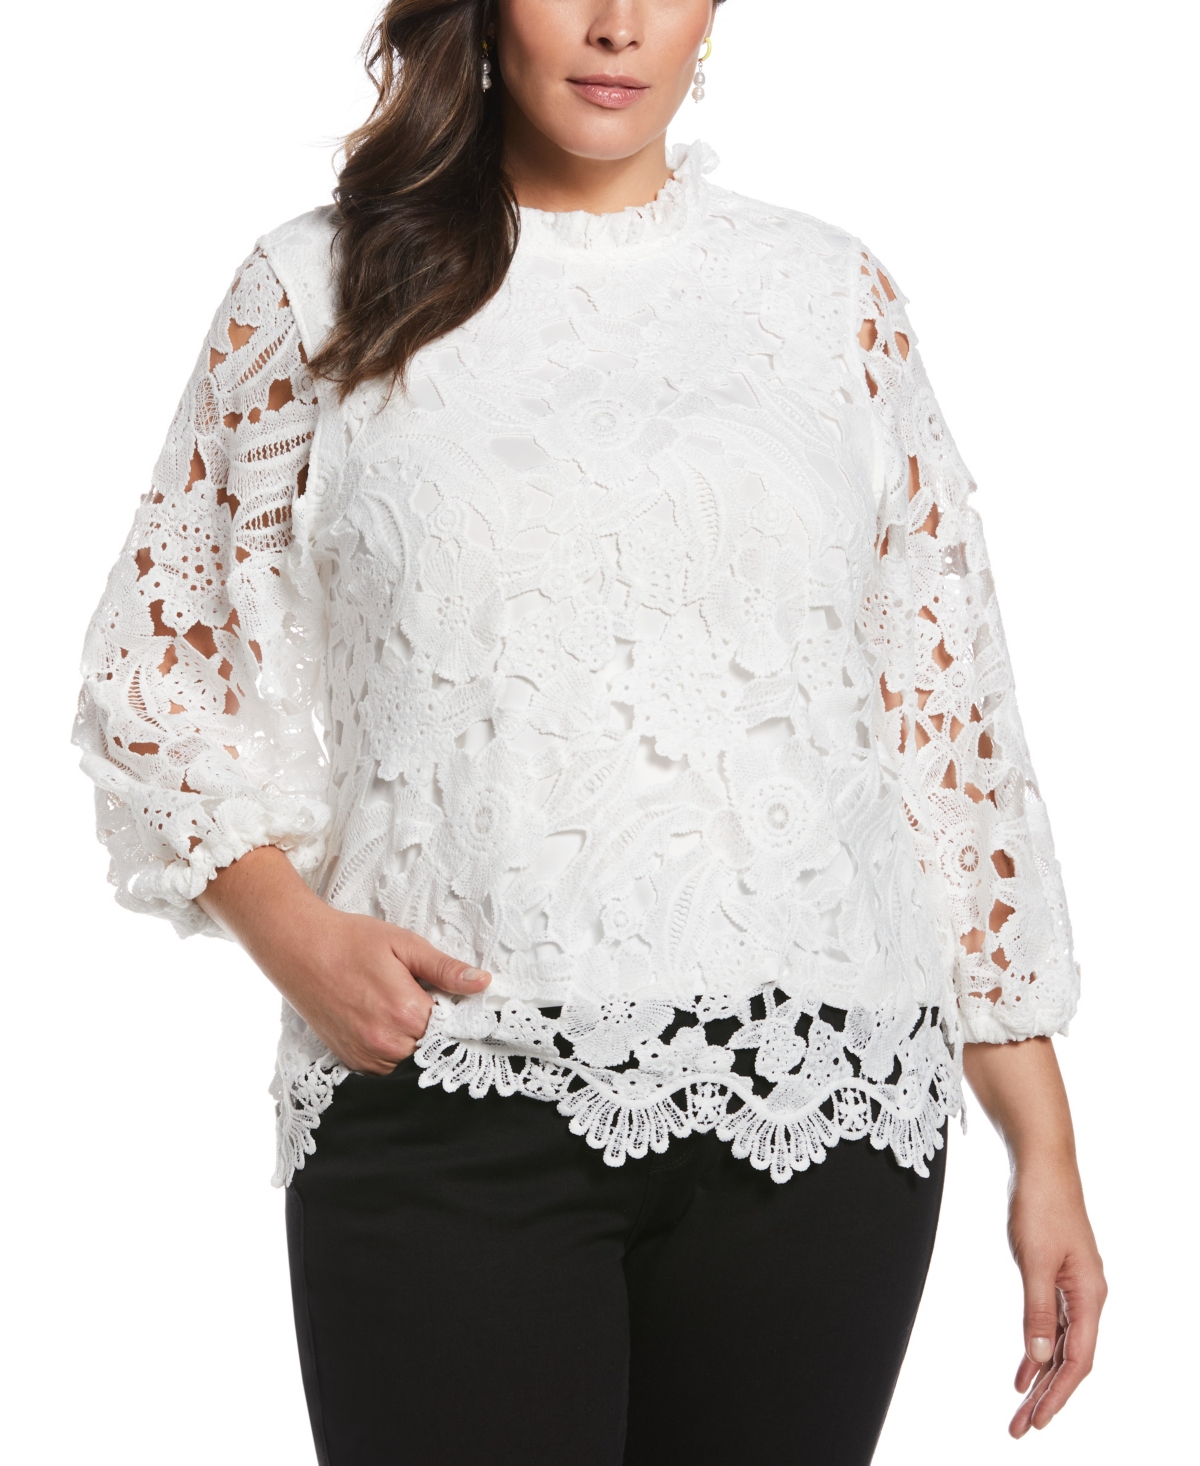 Plus Size Lace Mock Neck 3/4 Sleeve Top - White